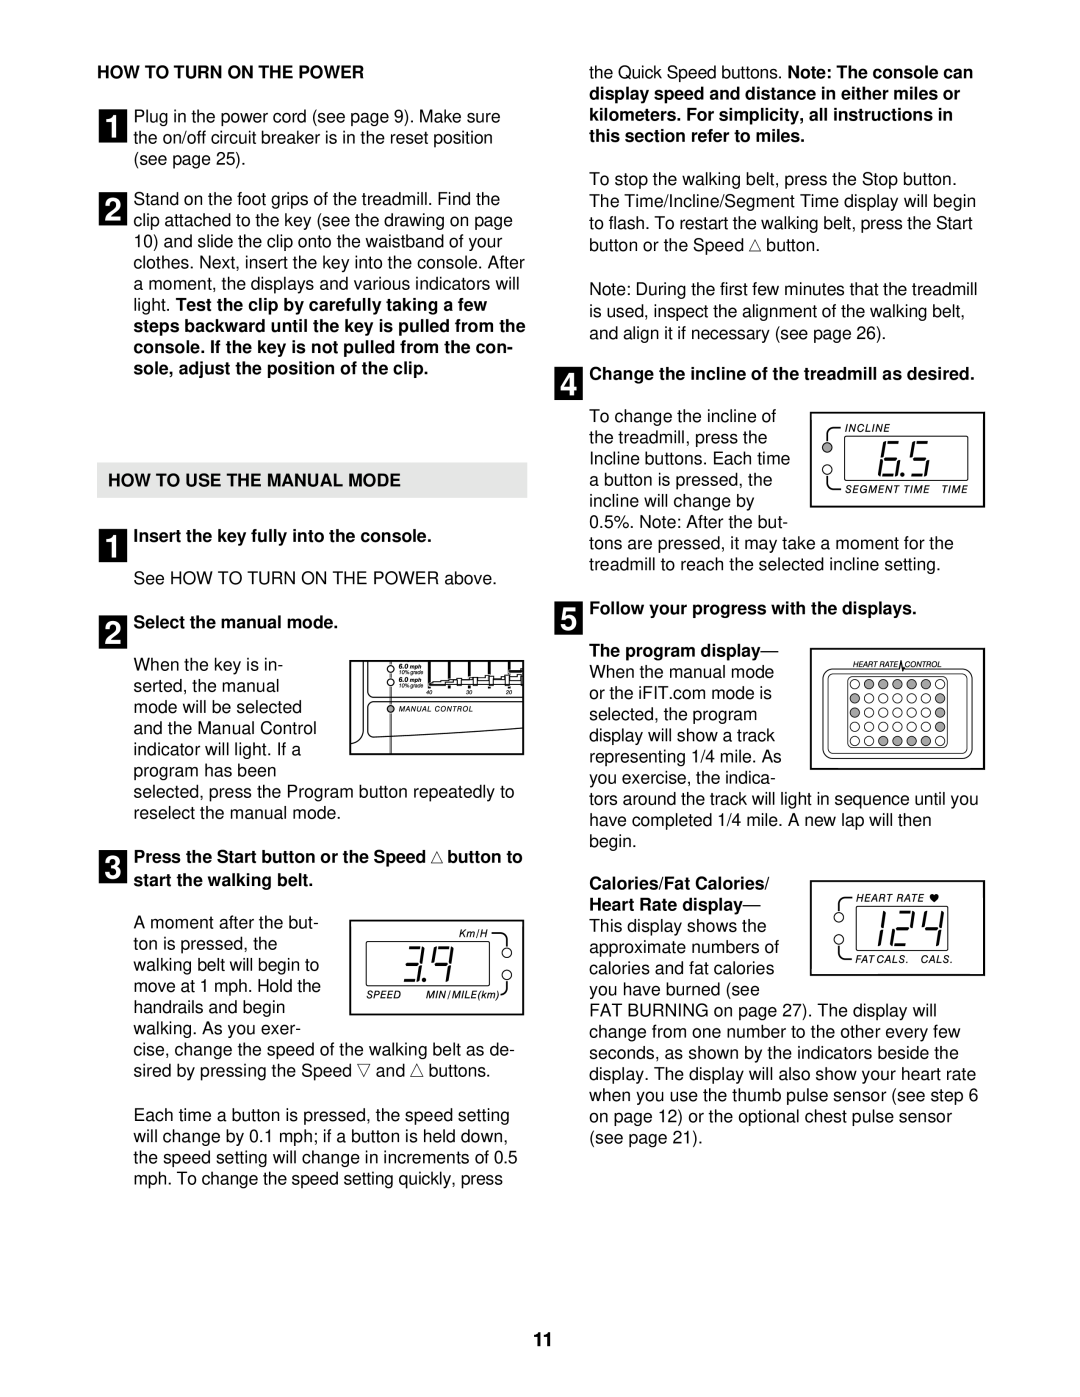 ProForm PFTL59121 user manual How To Turn On The Power, HOW TO USE THE MANUAL MODE 1 Insert the key fully into the console 